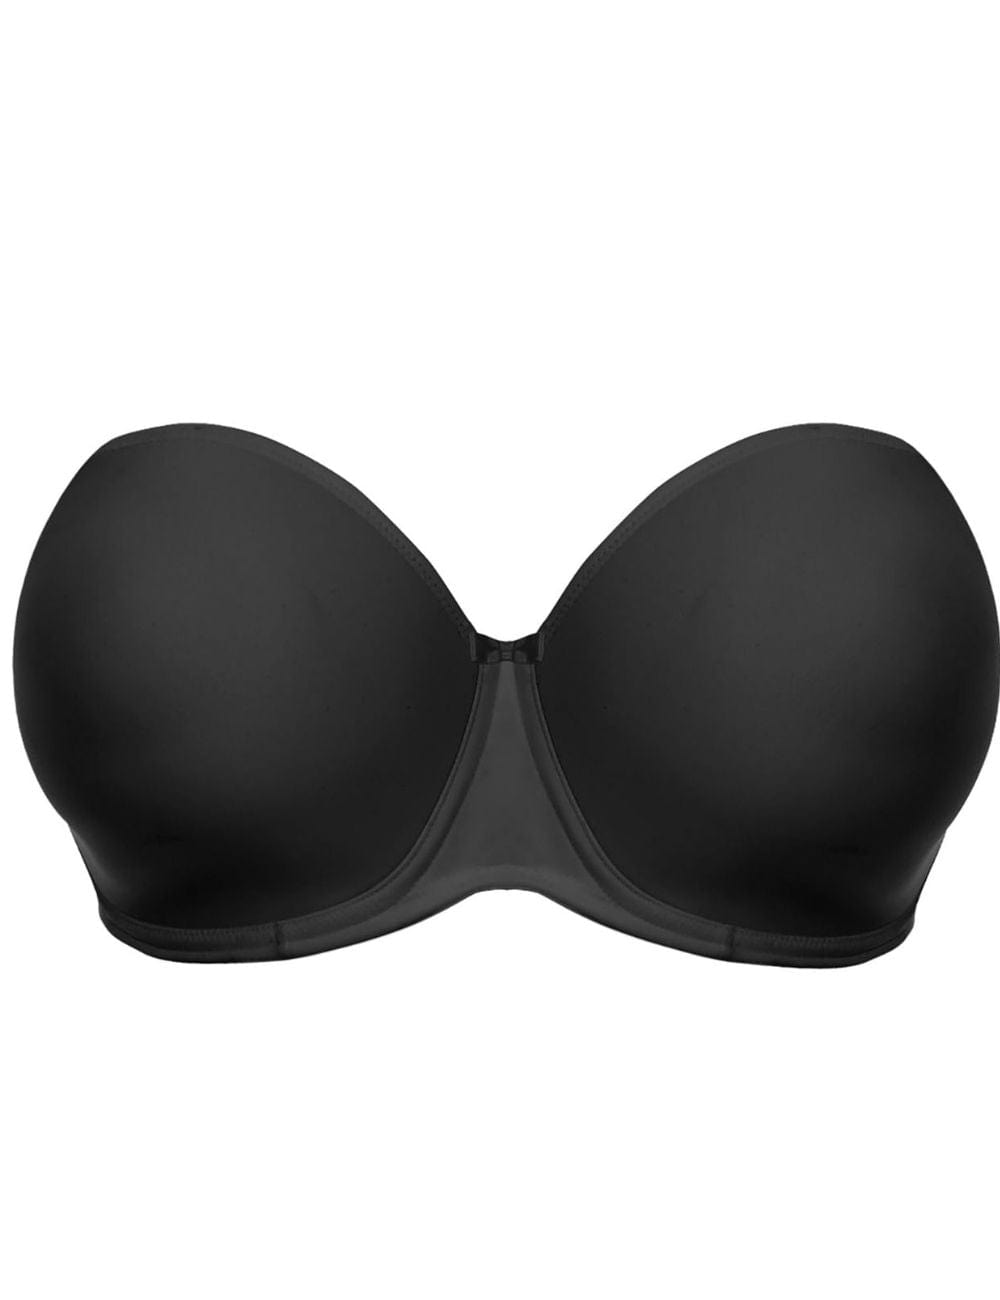 Elomi Smooth Moulded T-Shirt Bra